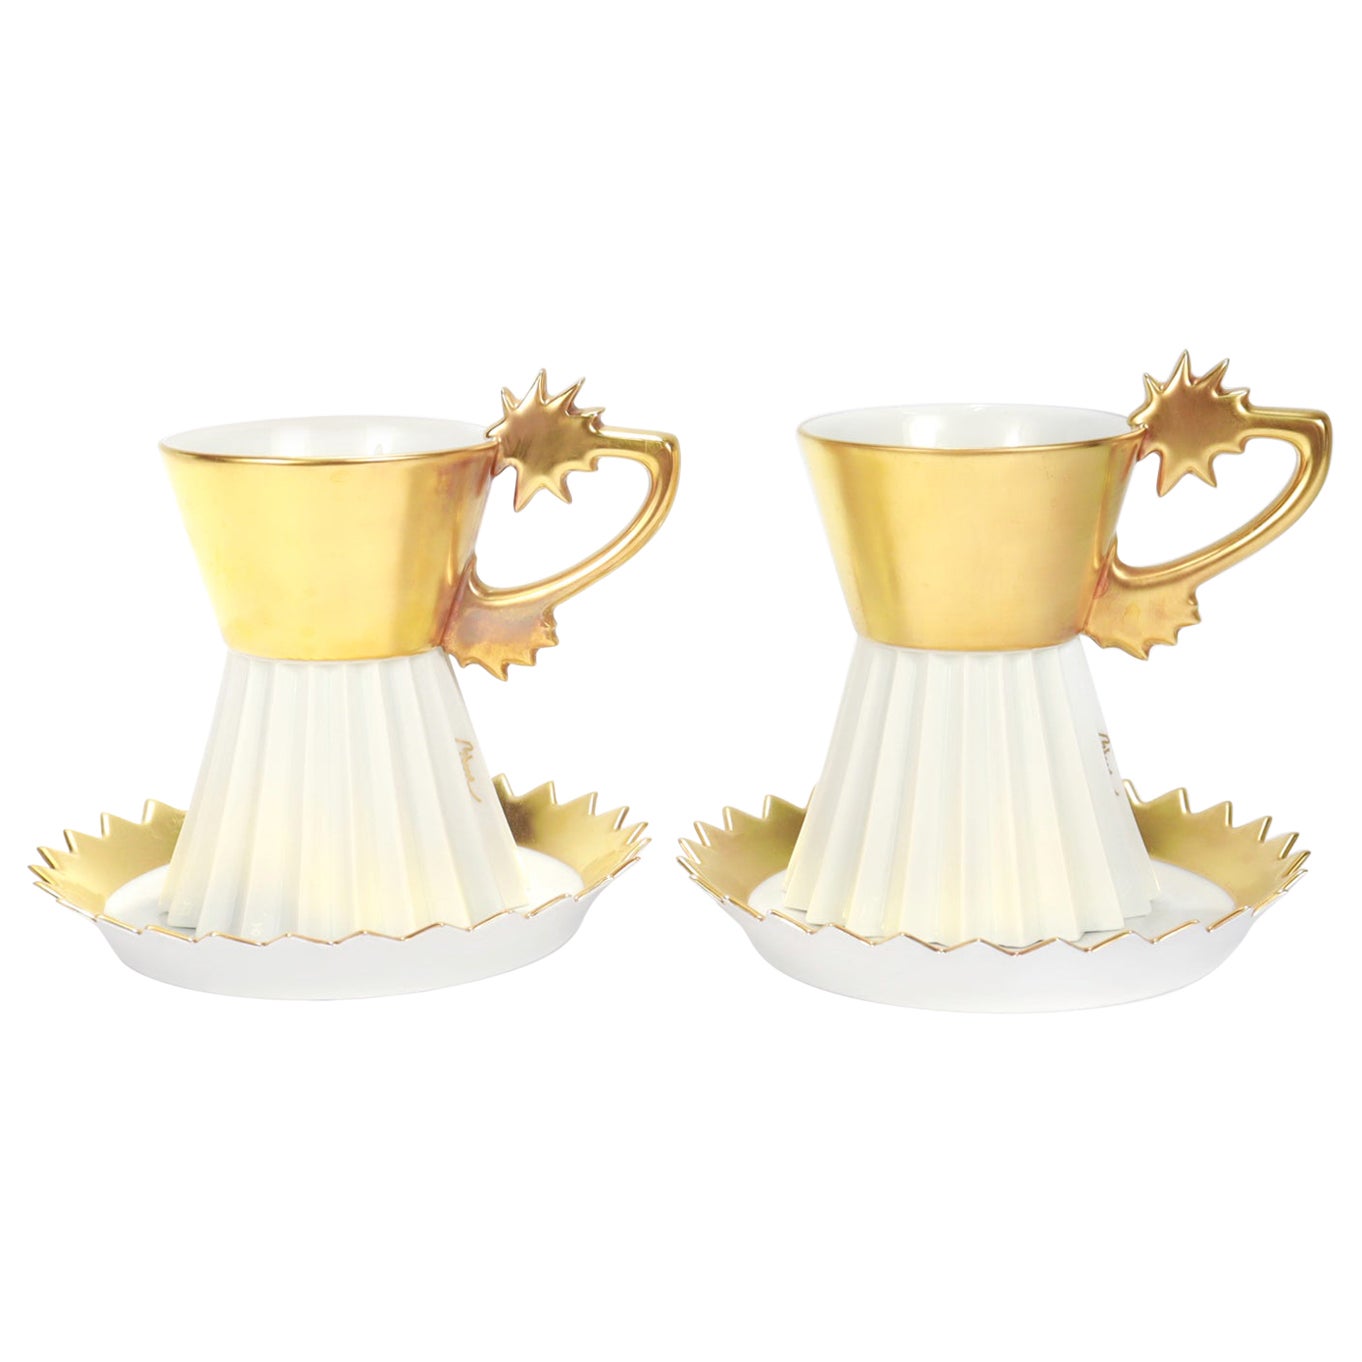 Pair of Rosenthal Studio Linie Gilt Porcelain No. 23 Cup & Saucers by Otto Piene For Sale